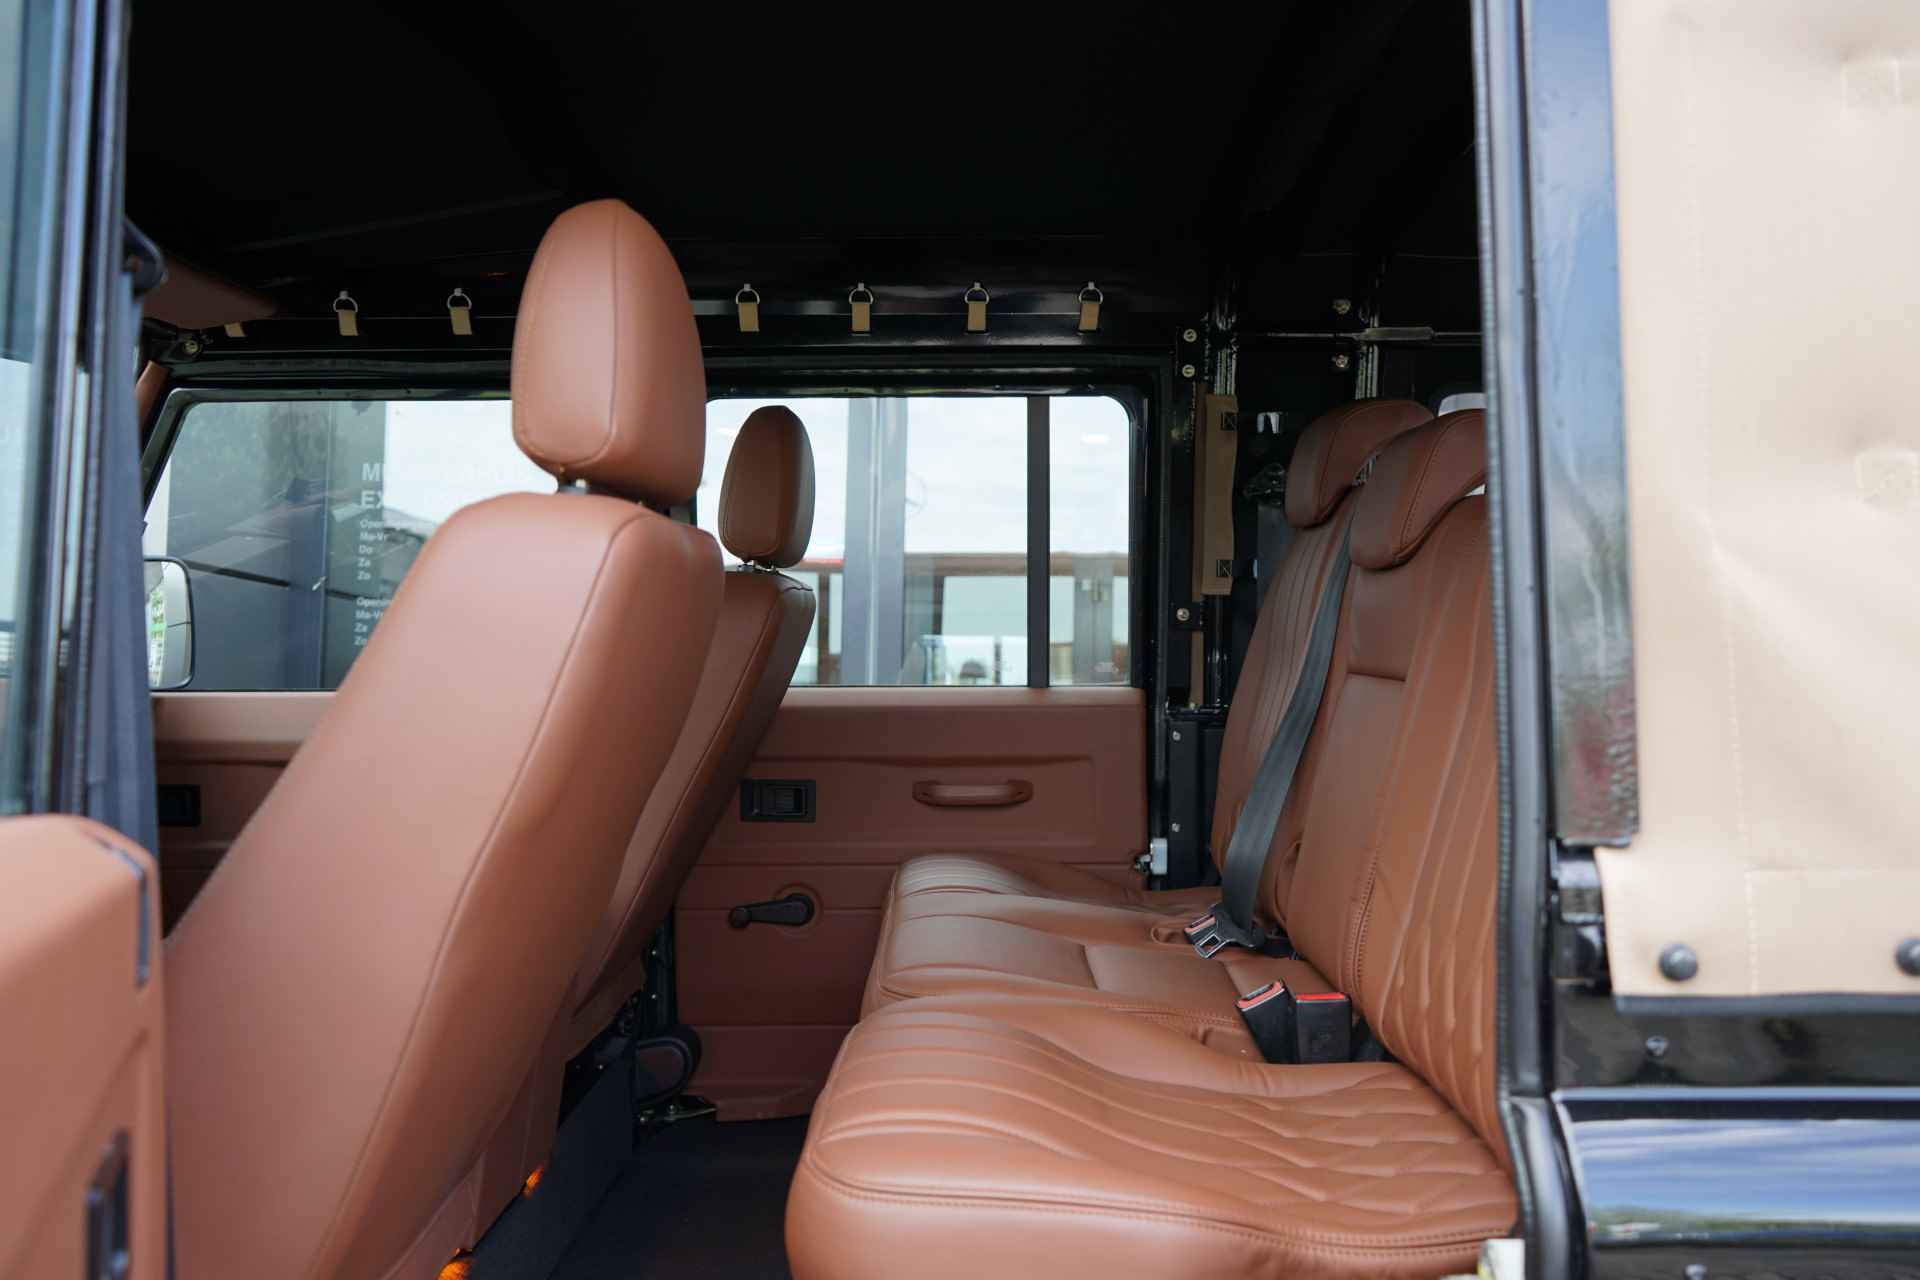 Land Rover Defender 2.4 TD 110 SW Convertible Brand New - River House Rebuild, Butterscotch Leather, BF Goodridge Tyres - 5/26